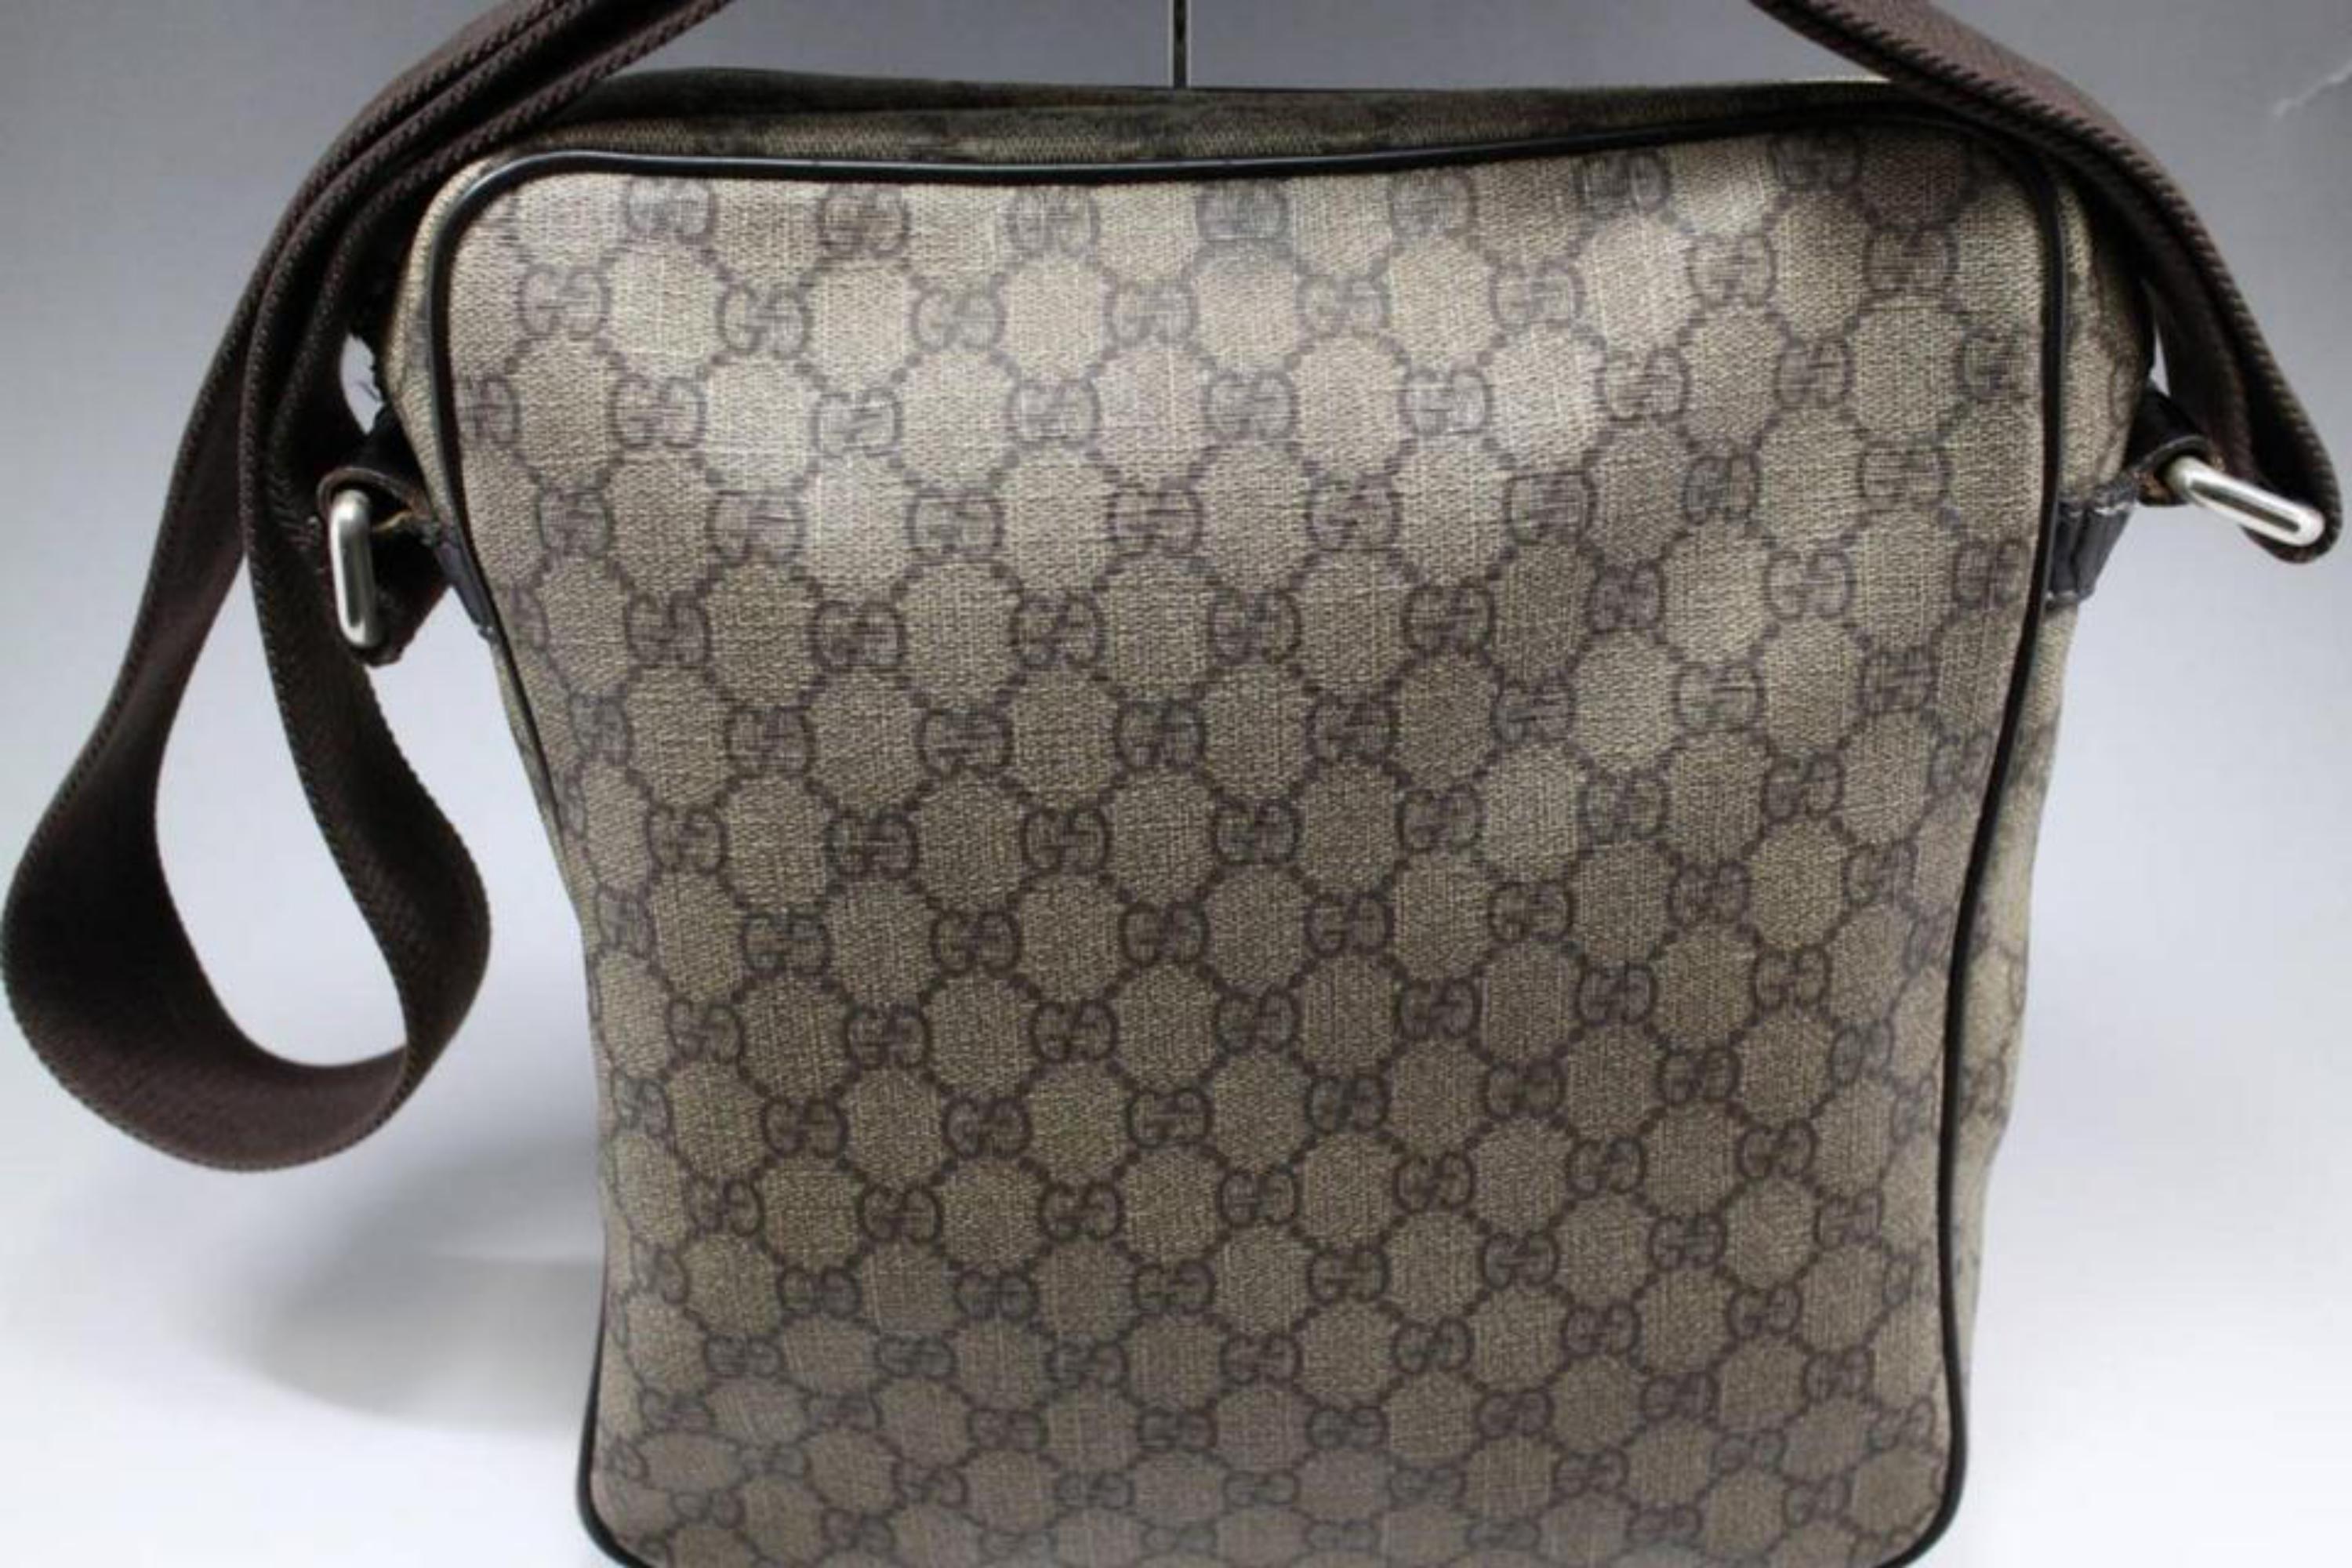 Gucci Supreme Monogram 232381 Brown Coated Canvas Cross Body Bag In Good Condition For Sale In Forest Hills, NY